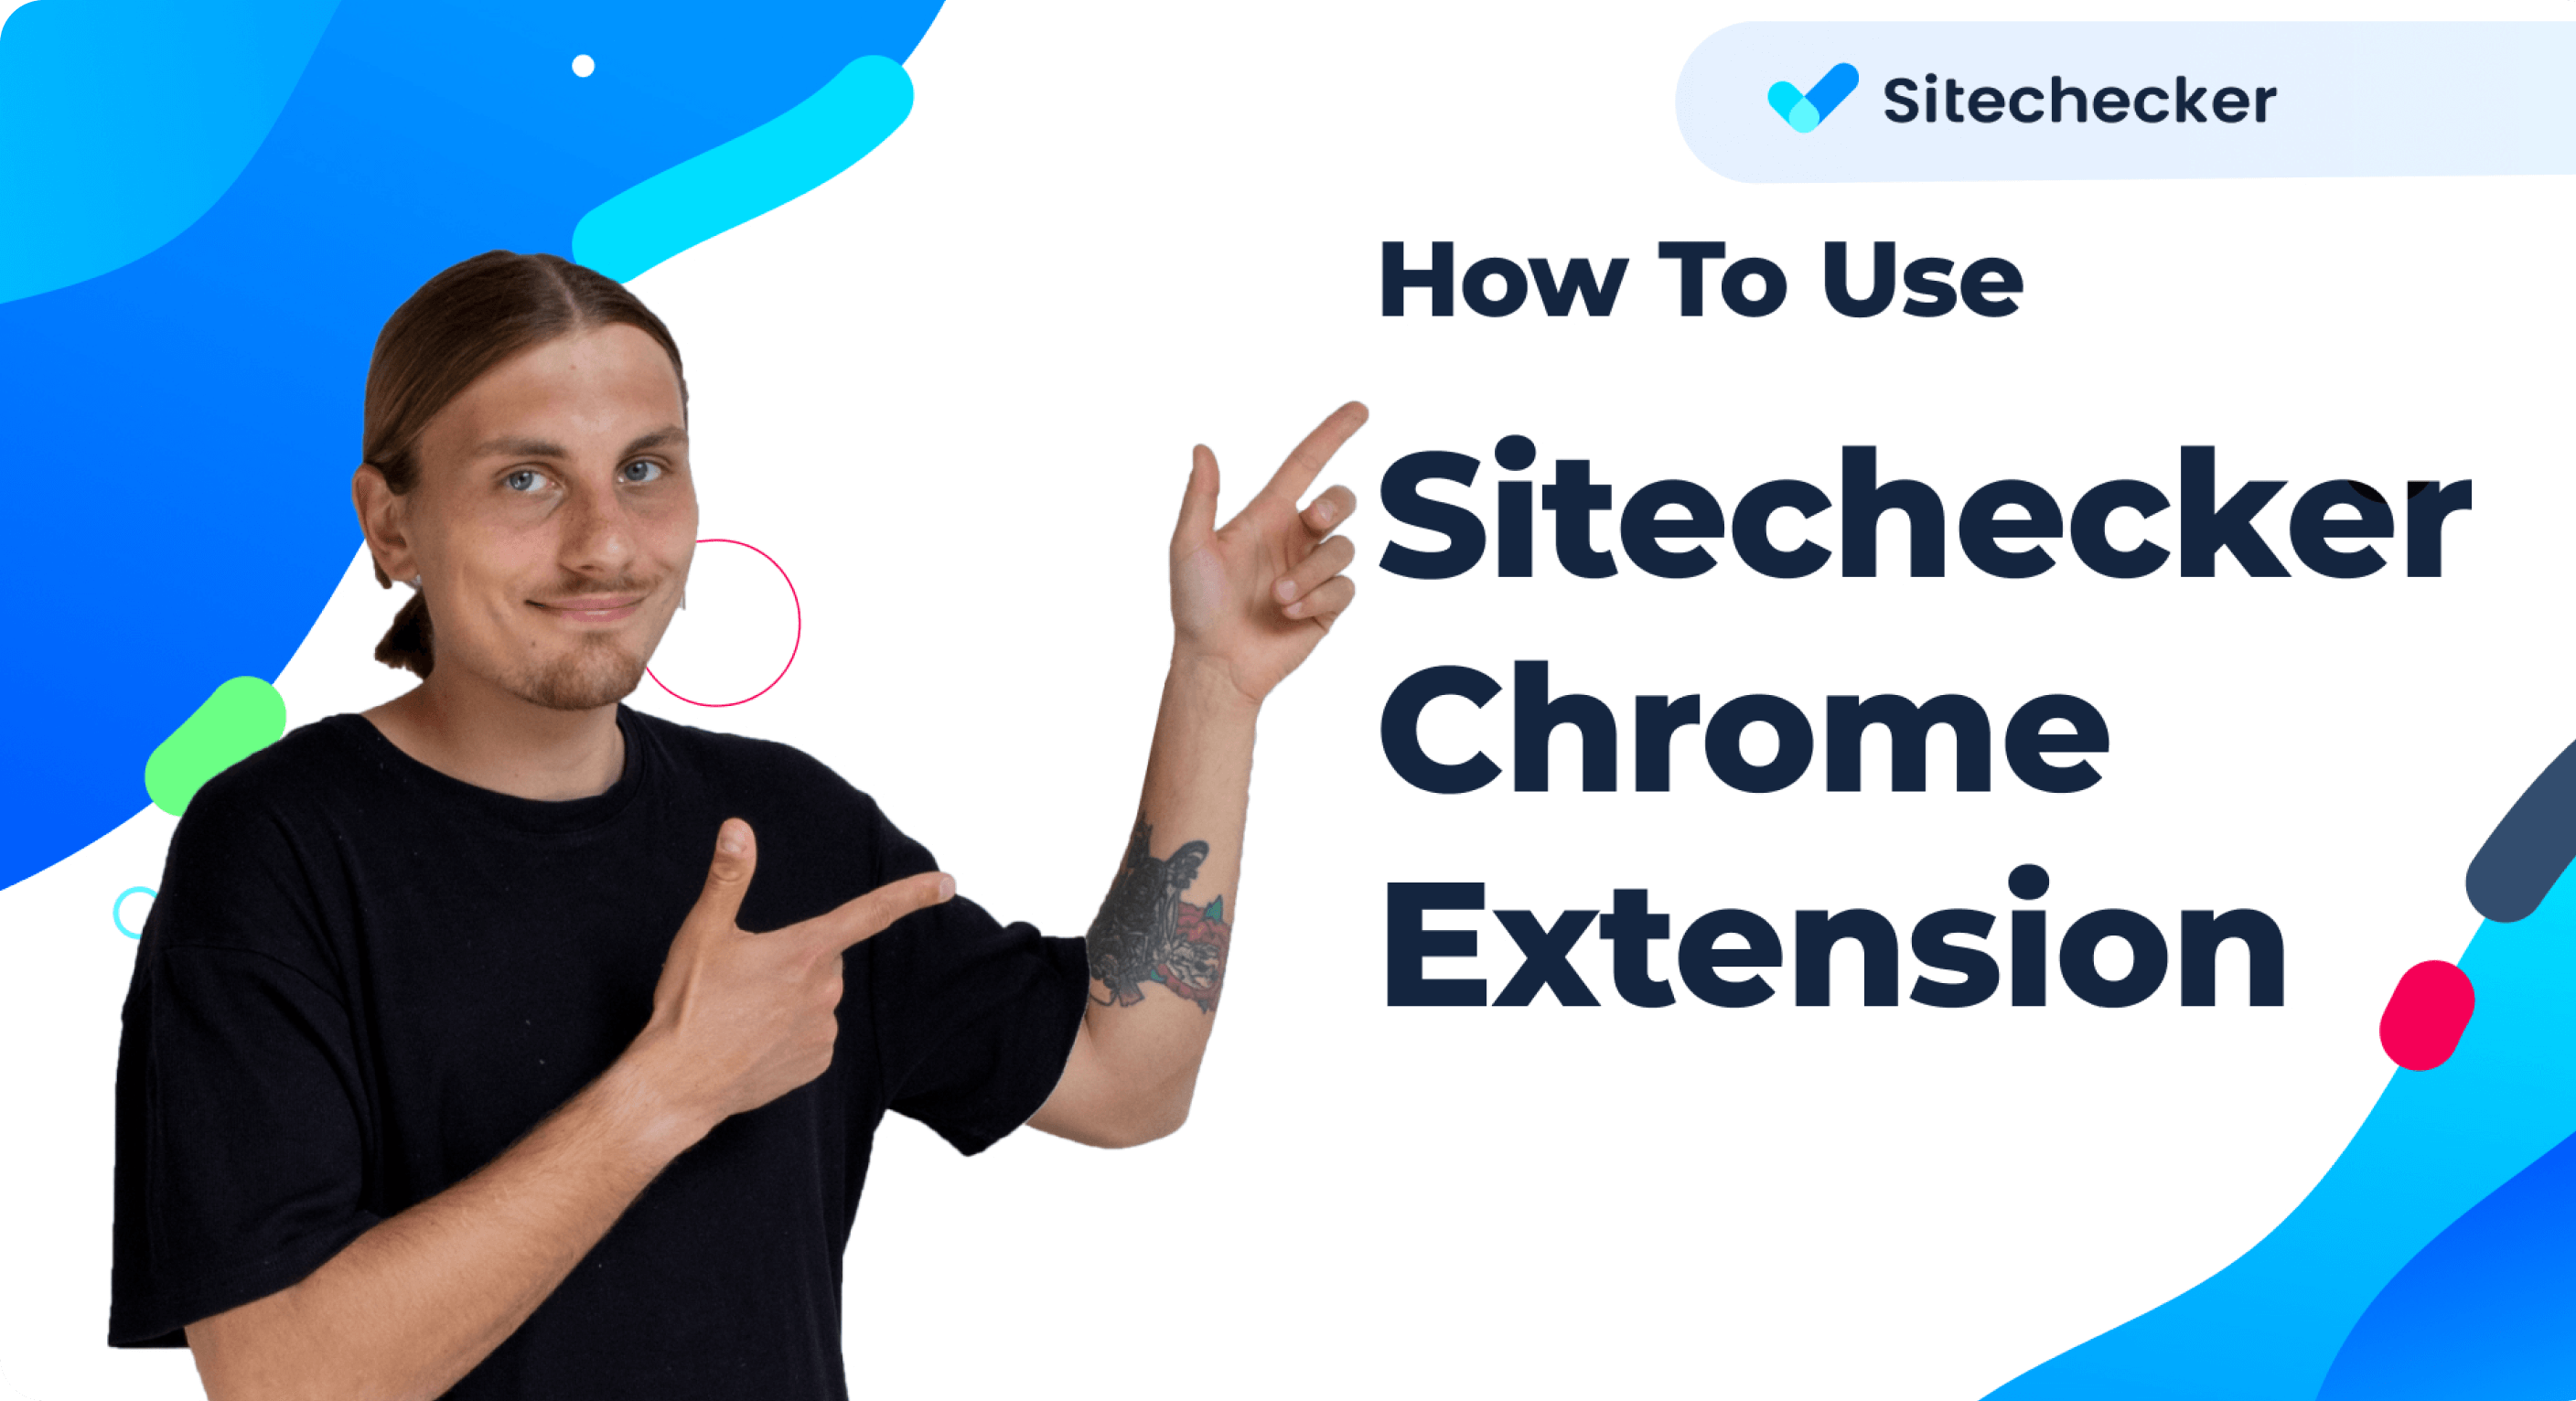 Guide how to use Sitechecker SEO extension.